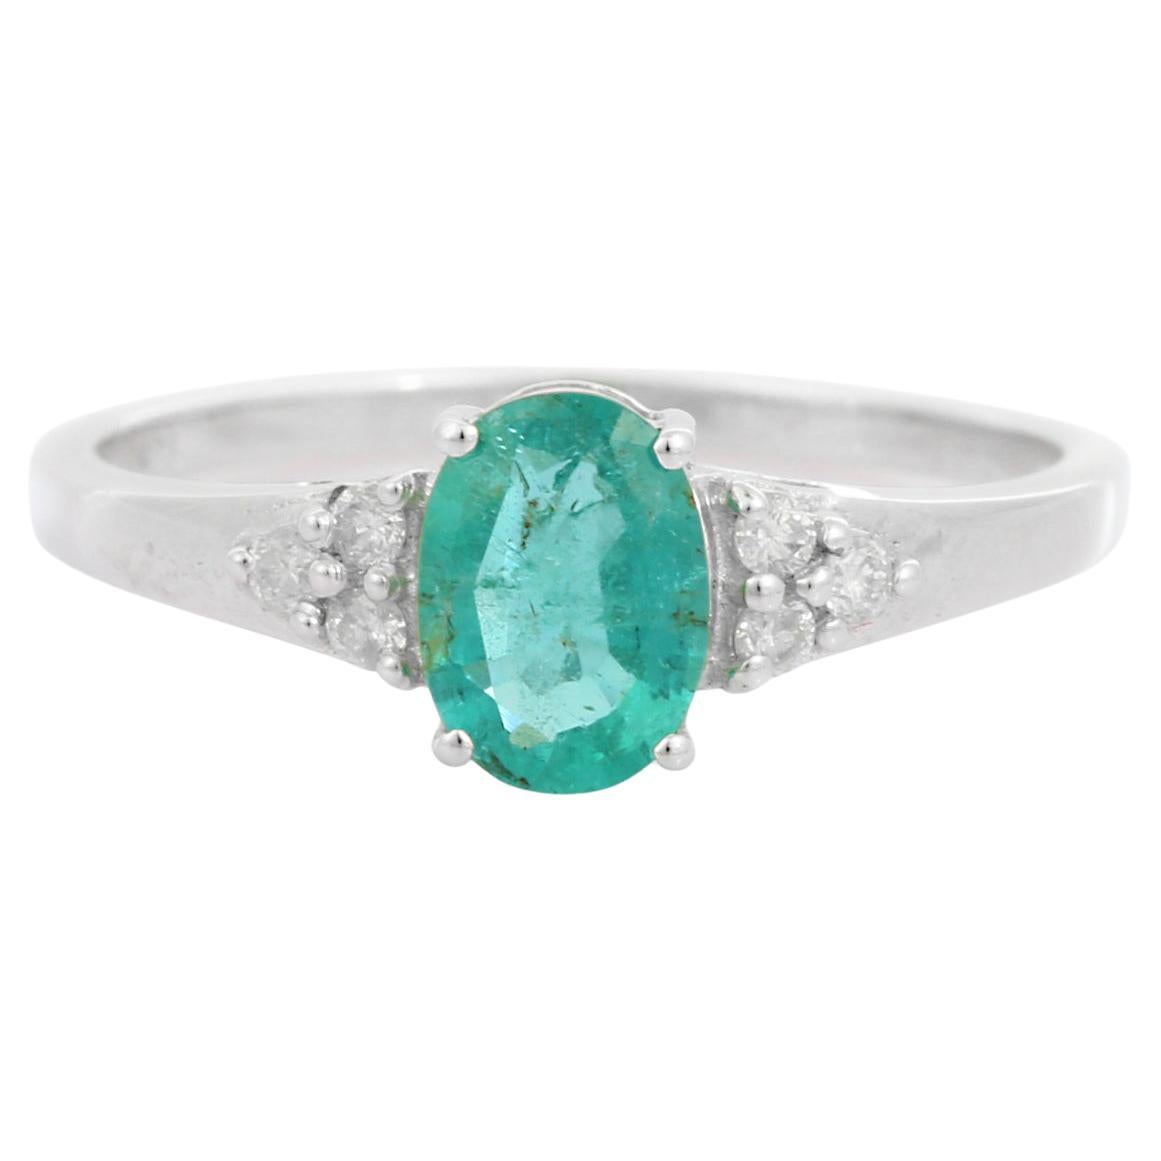 For Sale:  18k Solid White Gold Emerald Diamond Engagement Ring, Emerald Ring